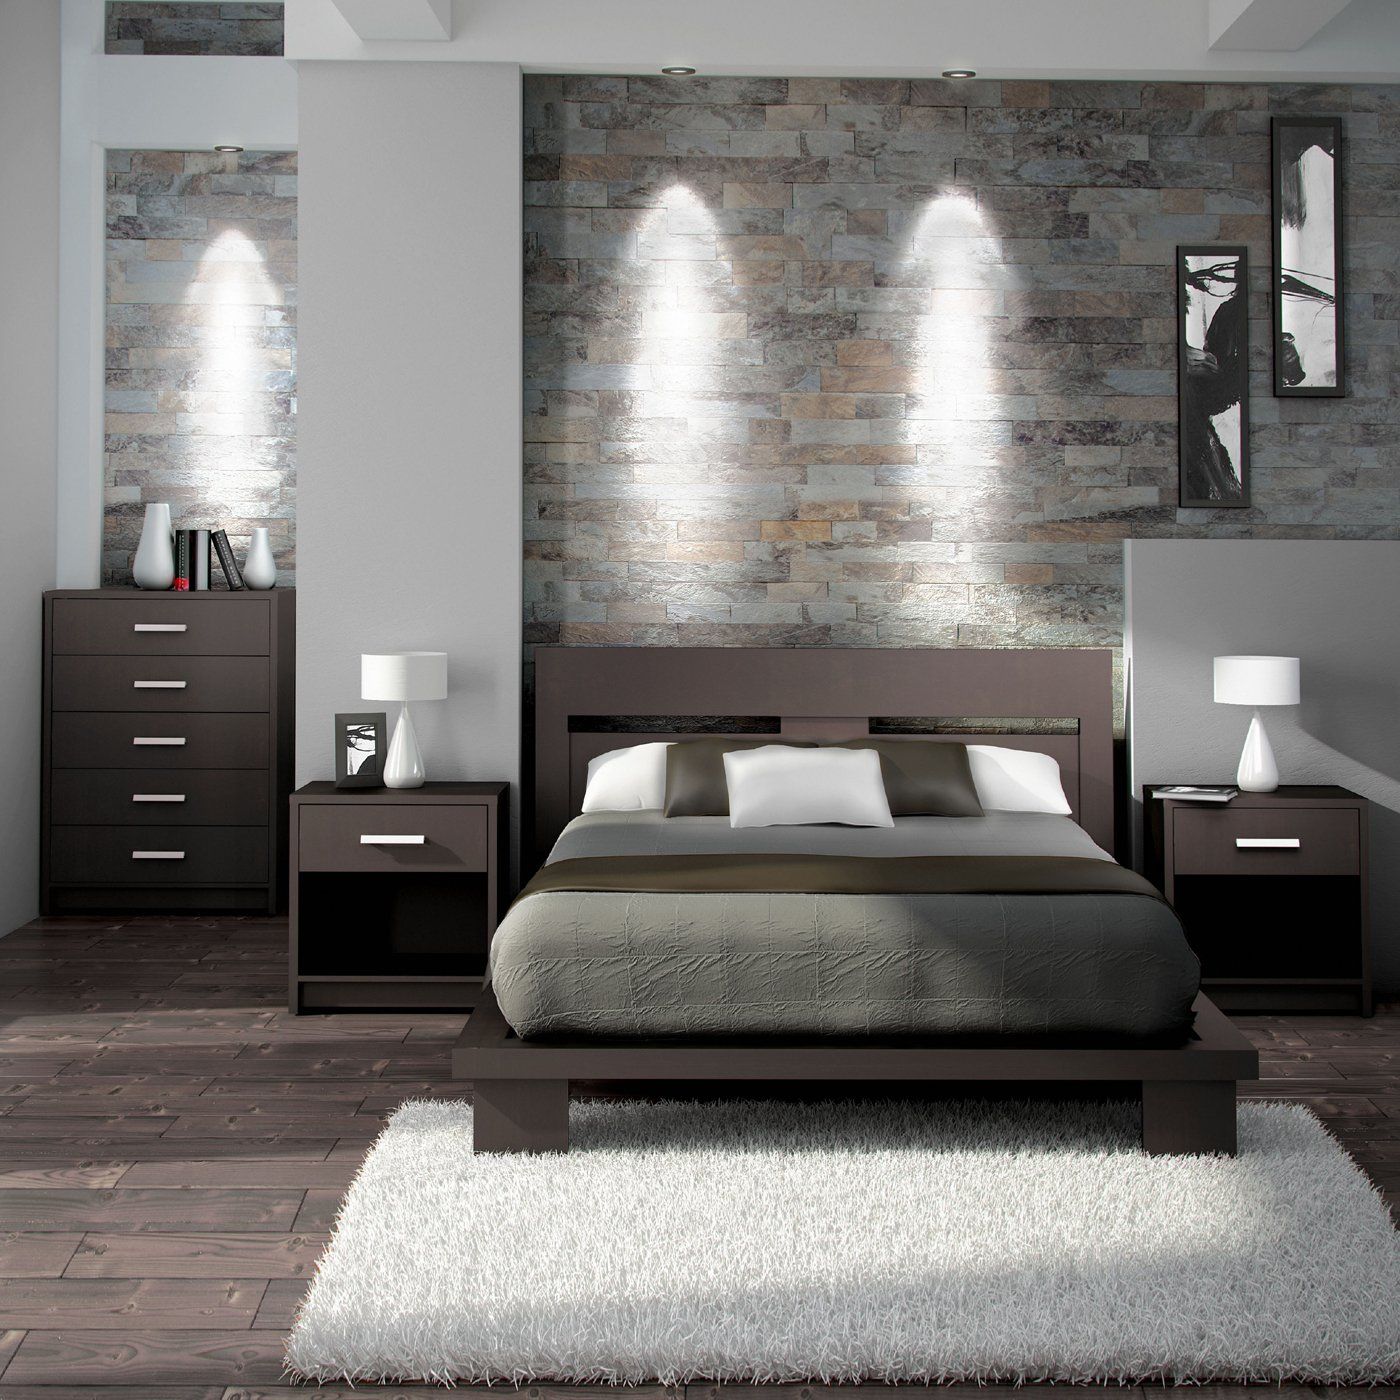 Modern bedrooms a simple and modern bedroom set in espresso brown. itu0027s made with a 100% KYNNPXC